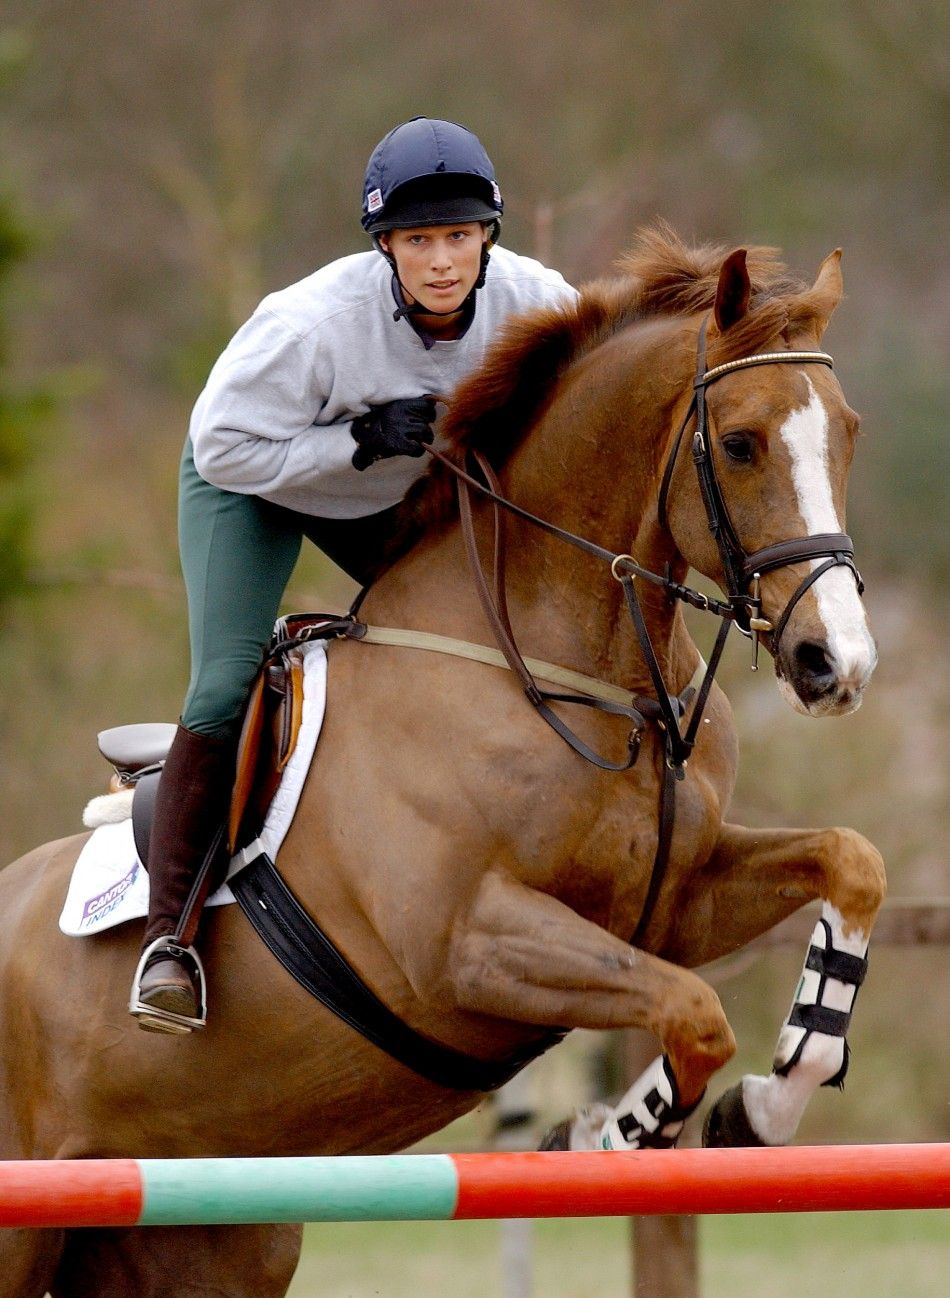 British Olympic hopeful Zara Phillips, the granddaughter of Britains Queen Elizabeth II, jumps as she rides Ardfield Magic Star during a training session at Waresley Park Stud Farm, in southern England, February 11, 2004. Phillips is aiming to be selec